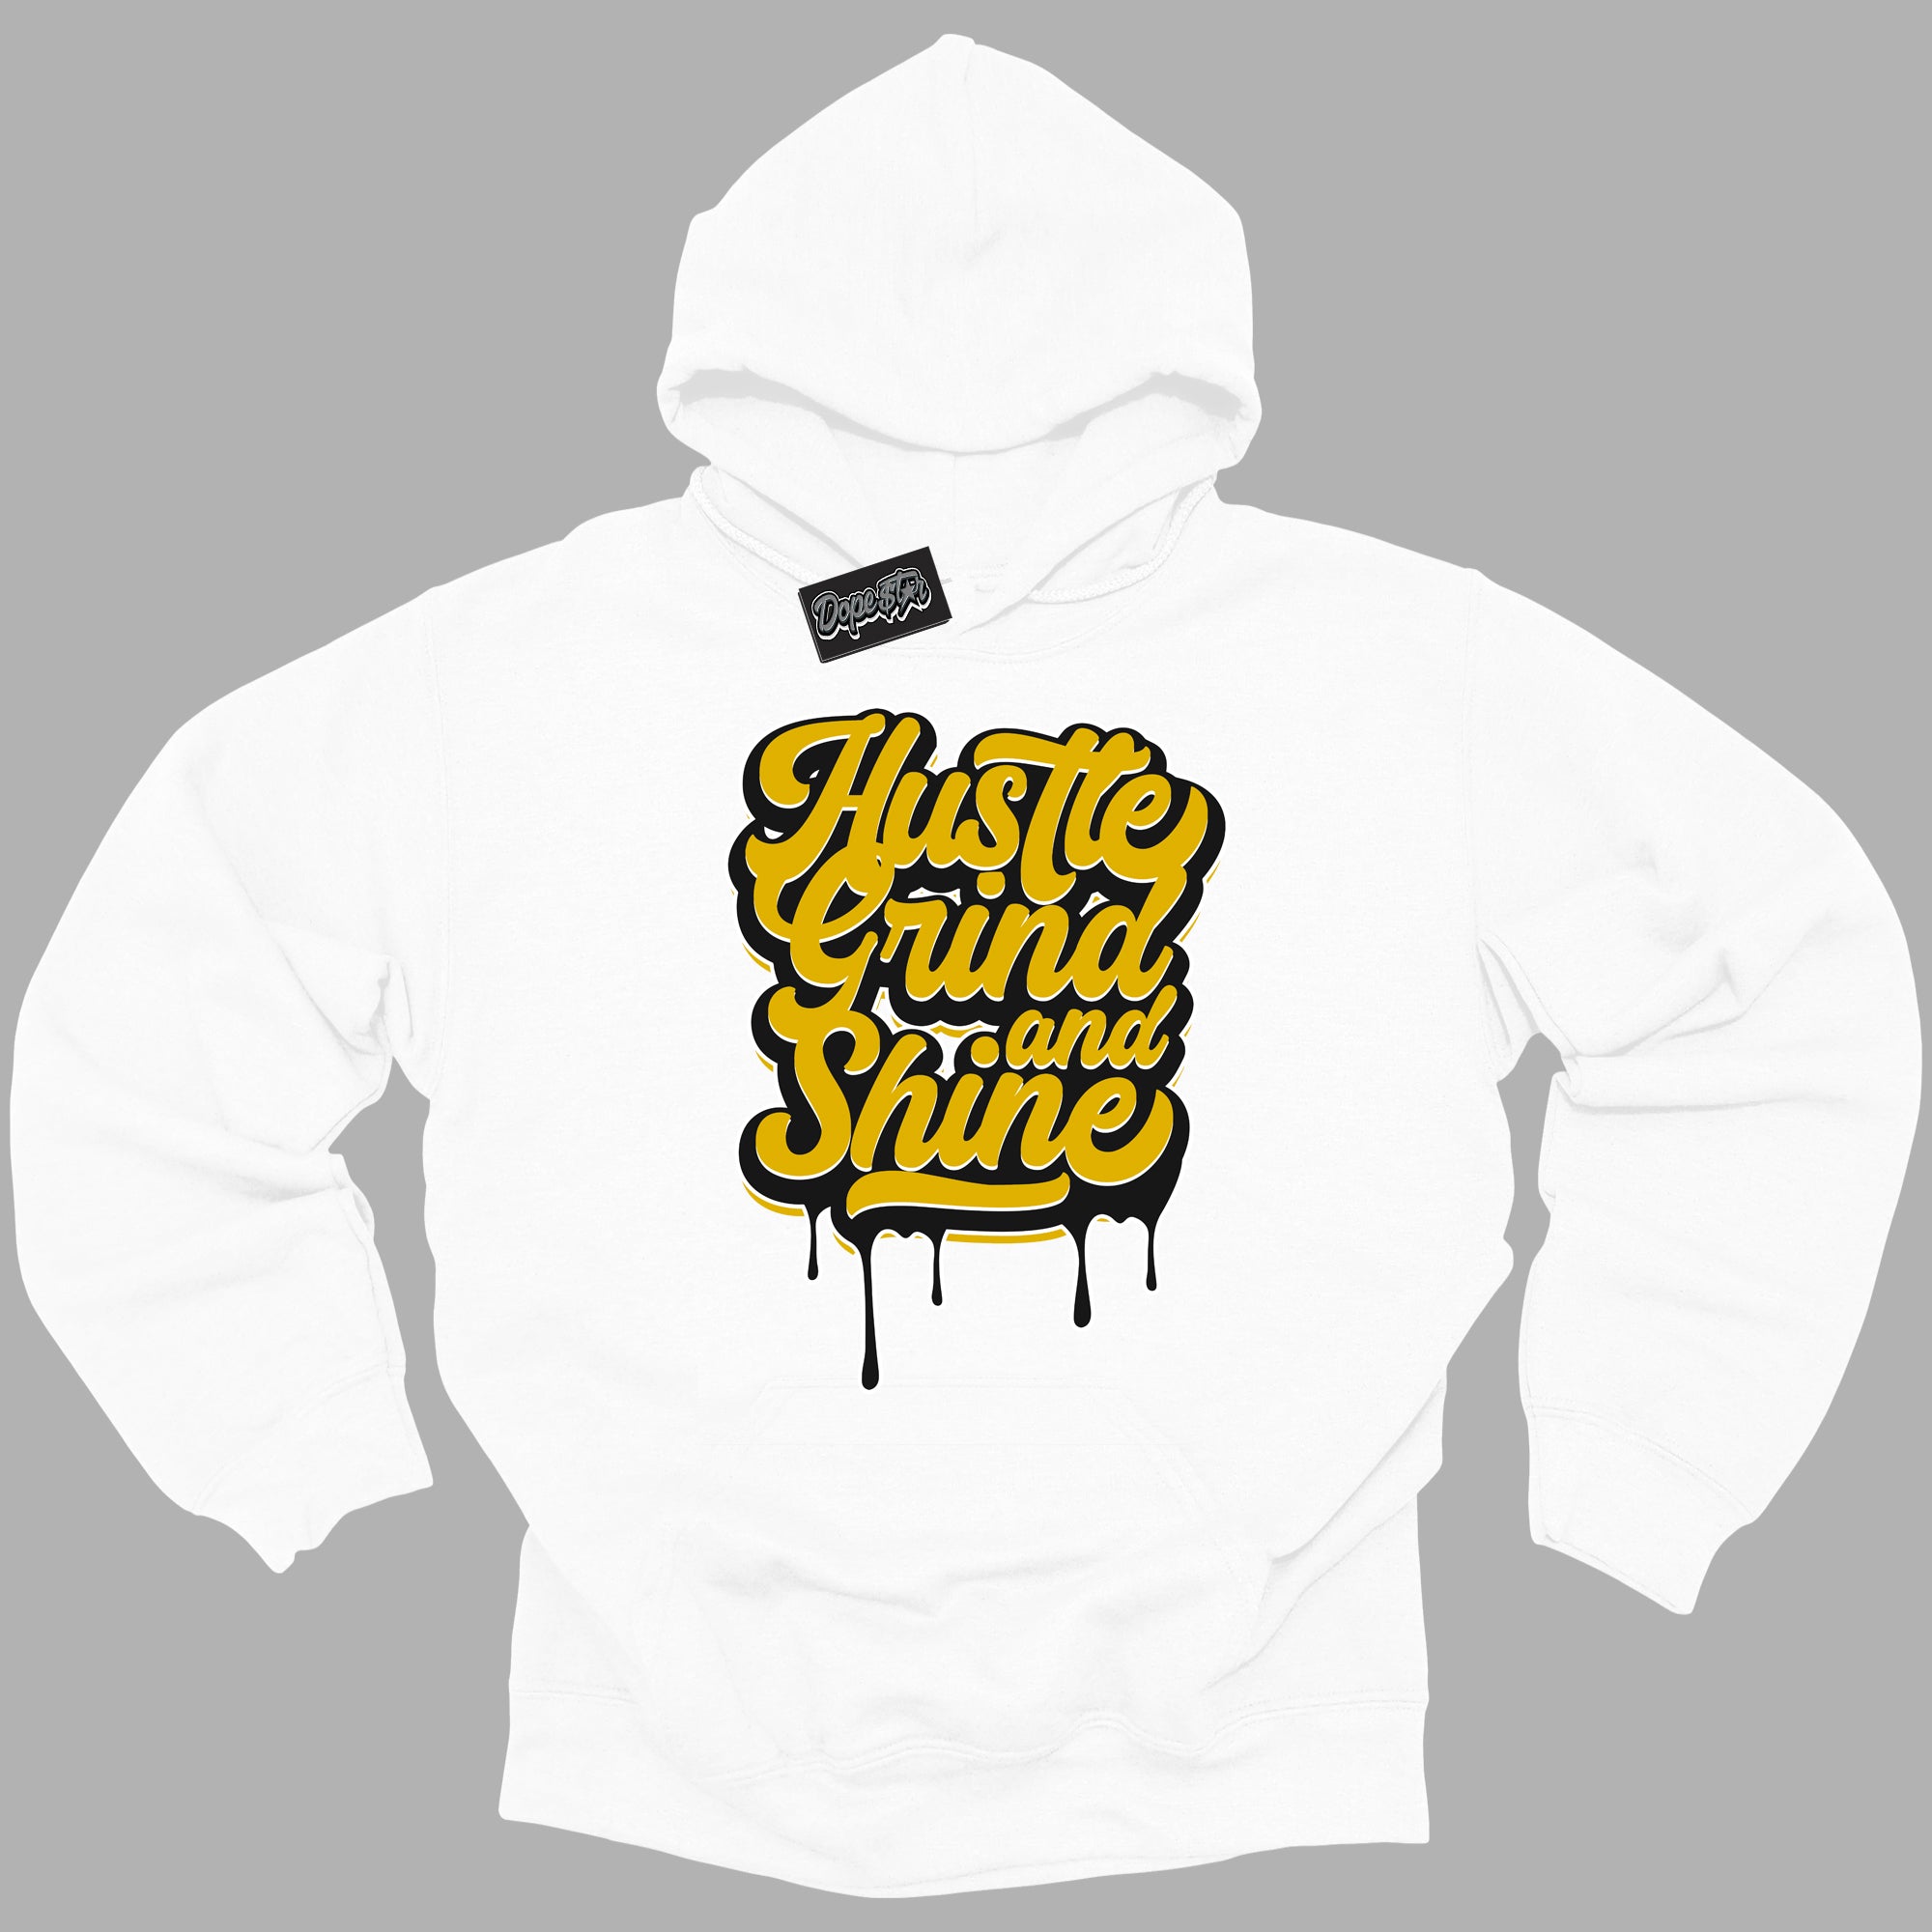 Cool White Hoodie with “ Hustle Grind And Shine ”  design that Perfectly Matches Yellow Ochre 6s Sneakers.